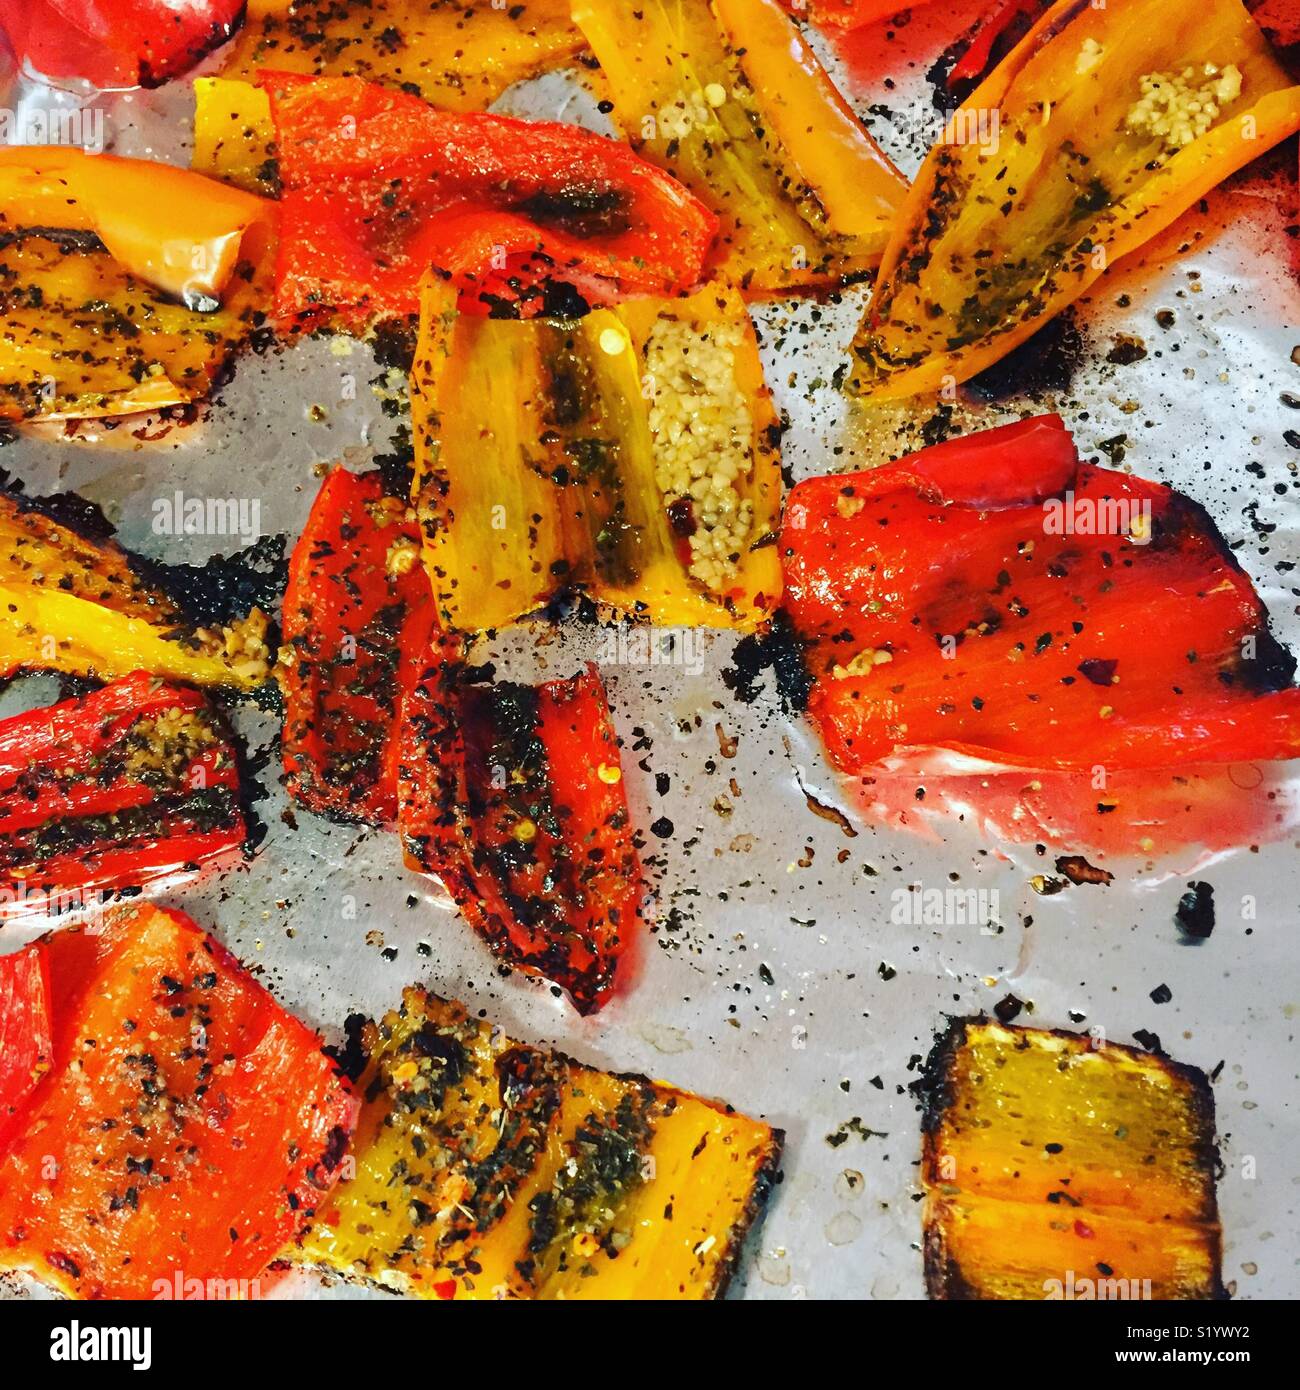 Roasted red peppers by K.R. Stock Photo